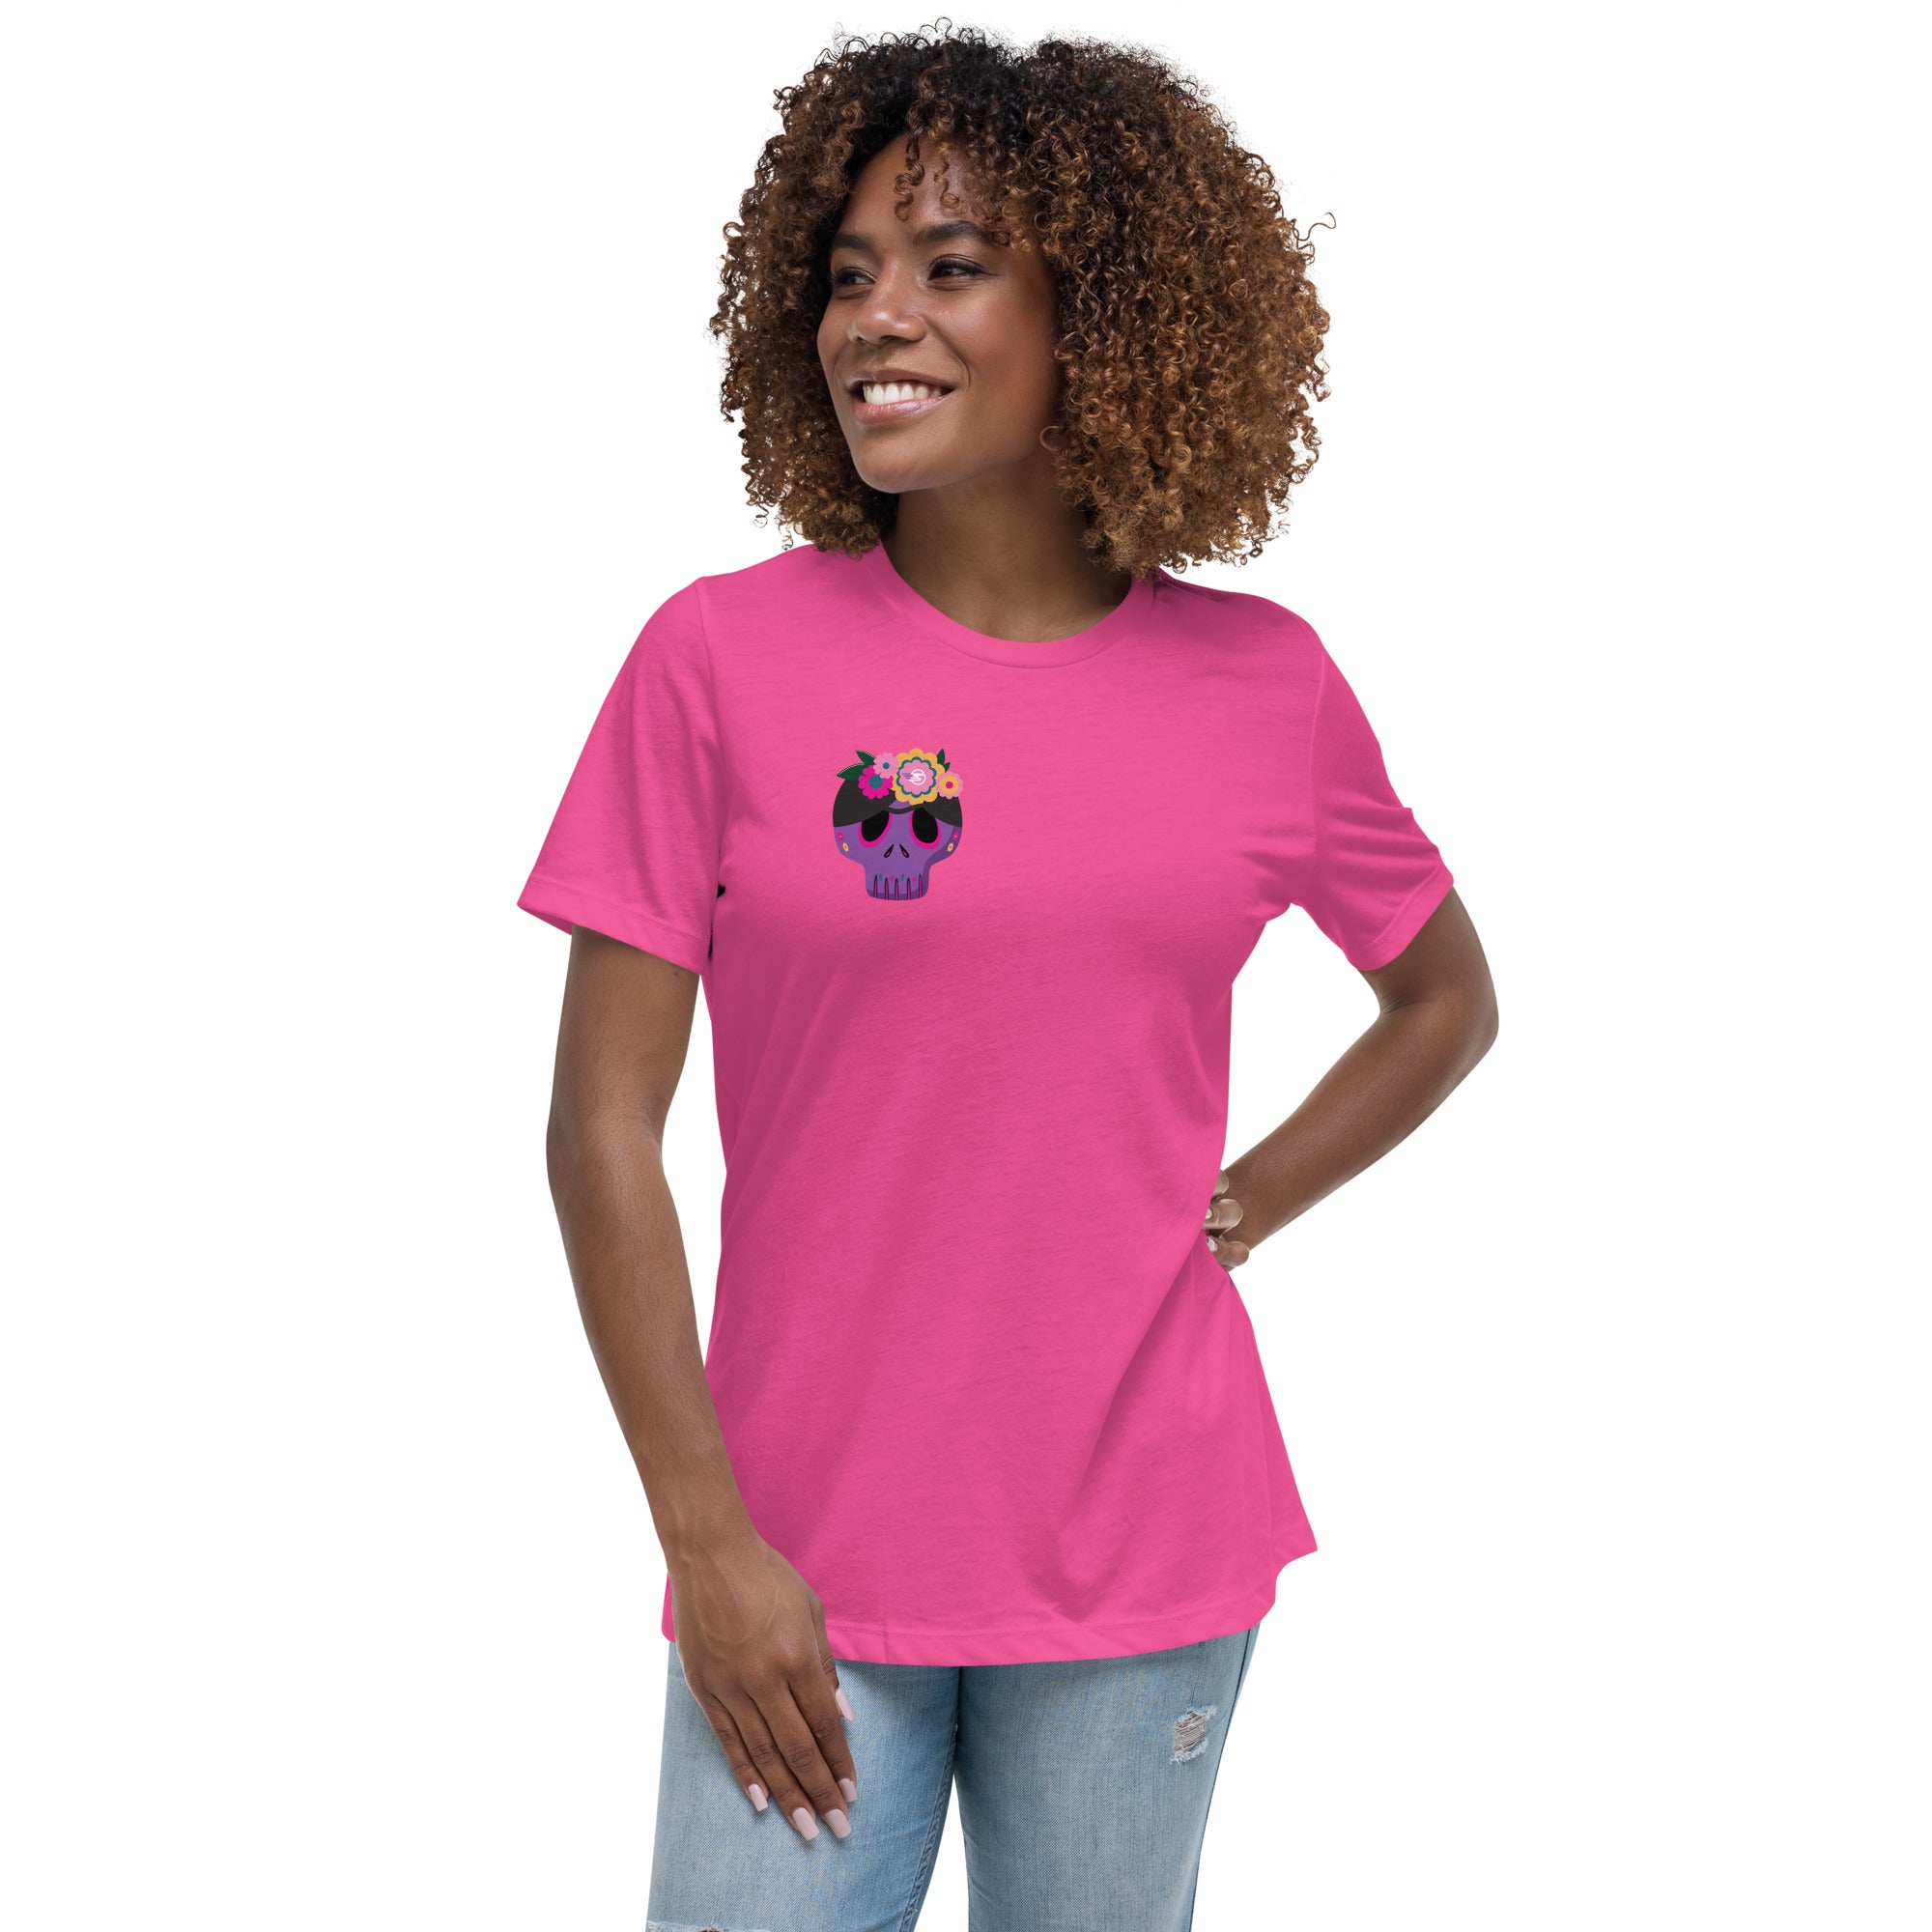 Gambyl Day of the Dead Sugar Skull Women's Relaxed T-Shirt